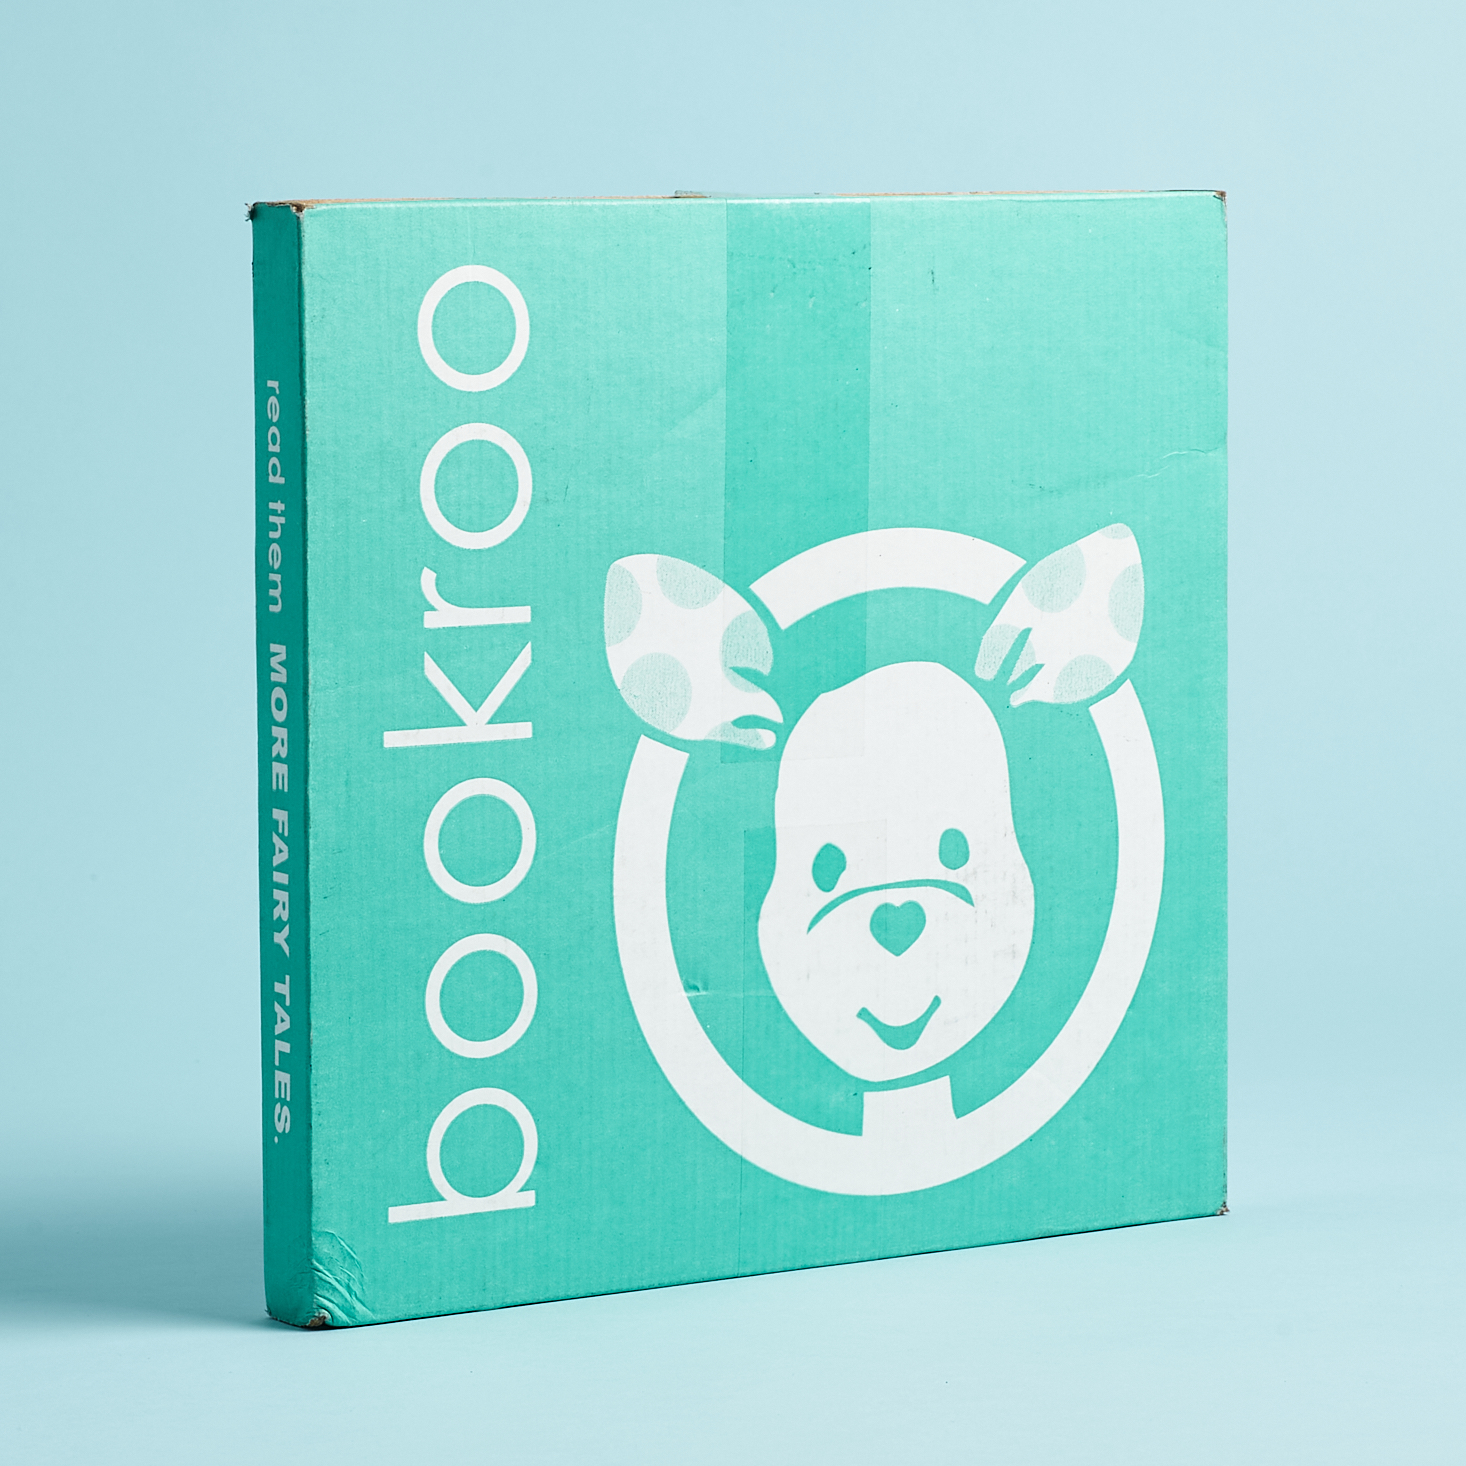 Bookroo Picture Book Box Review + Coupon – February 2021